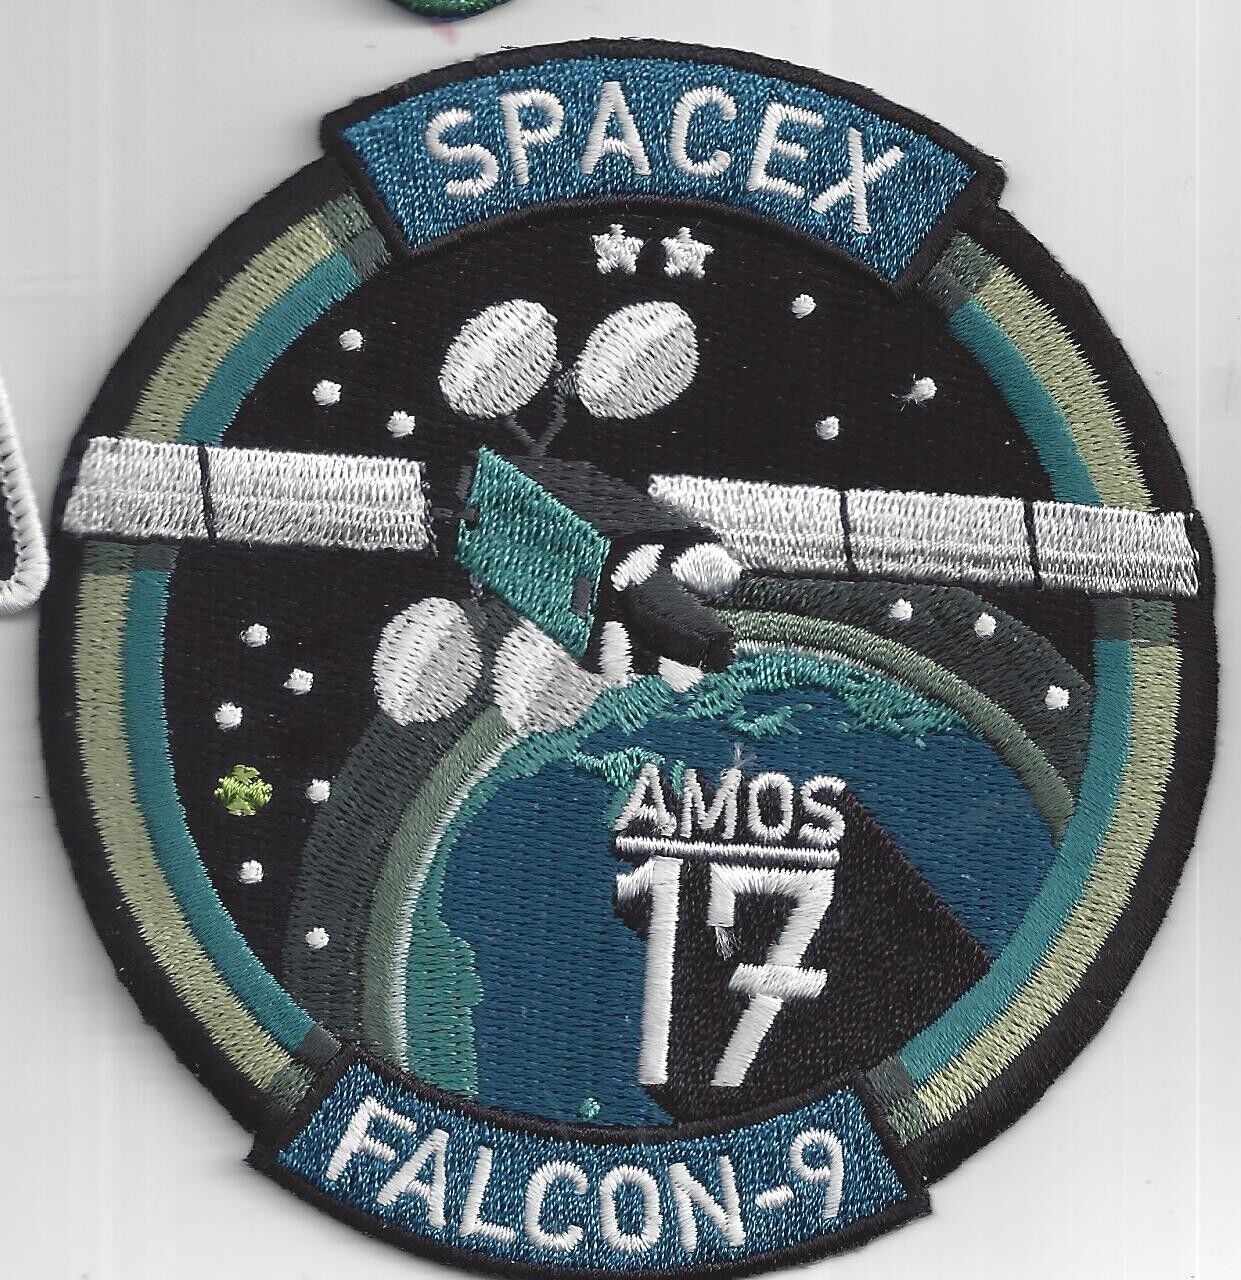 Patch Spacex Falcon 9 Amos 17   Jp